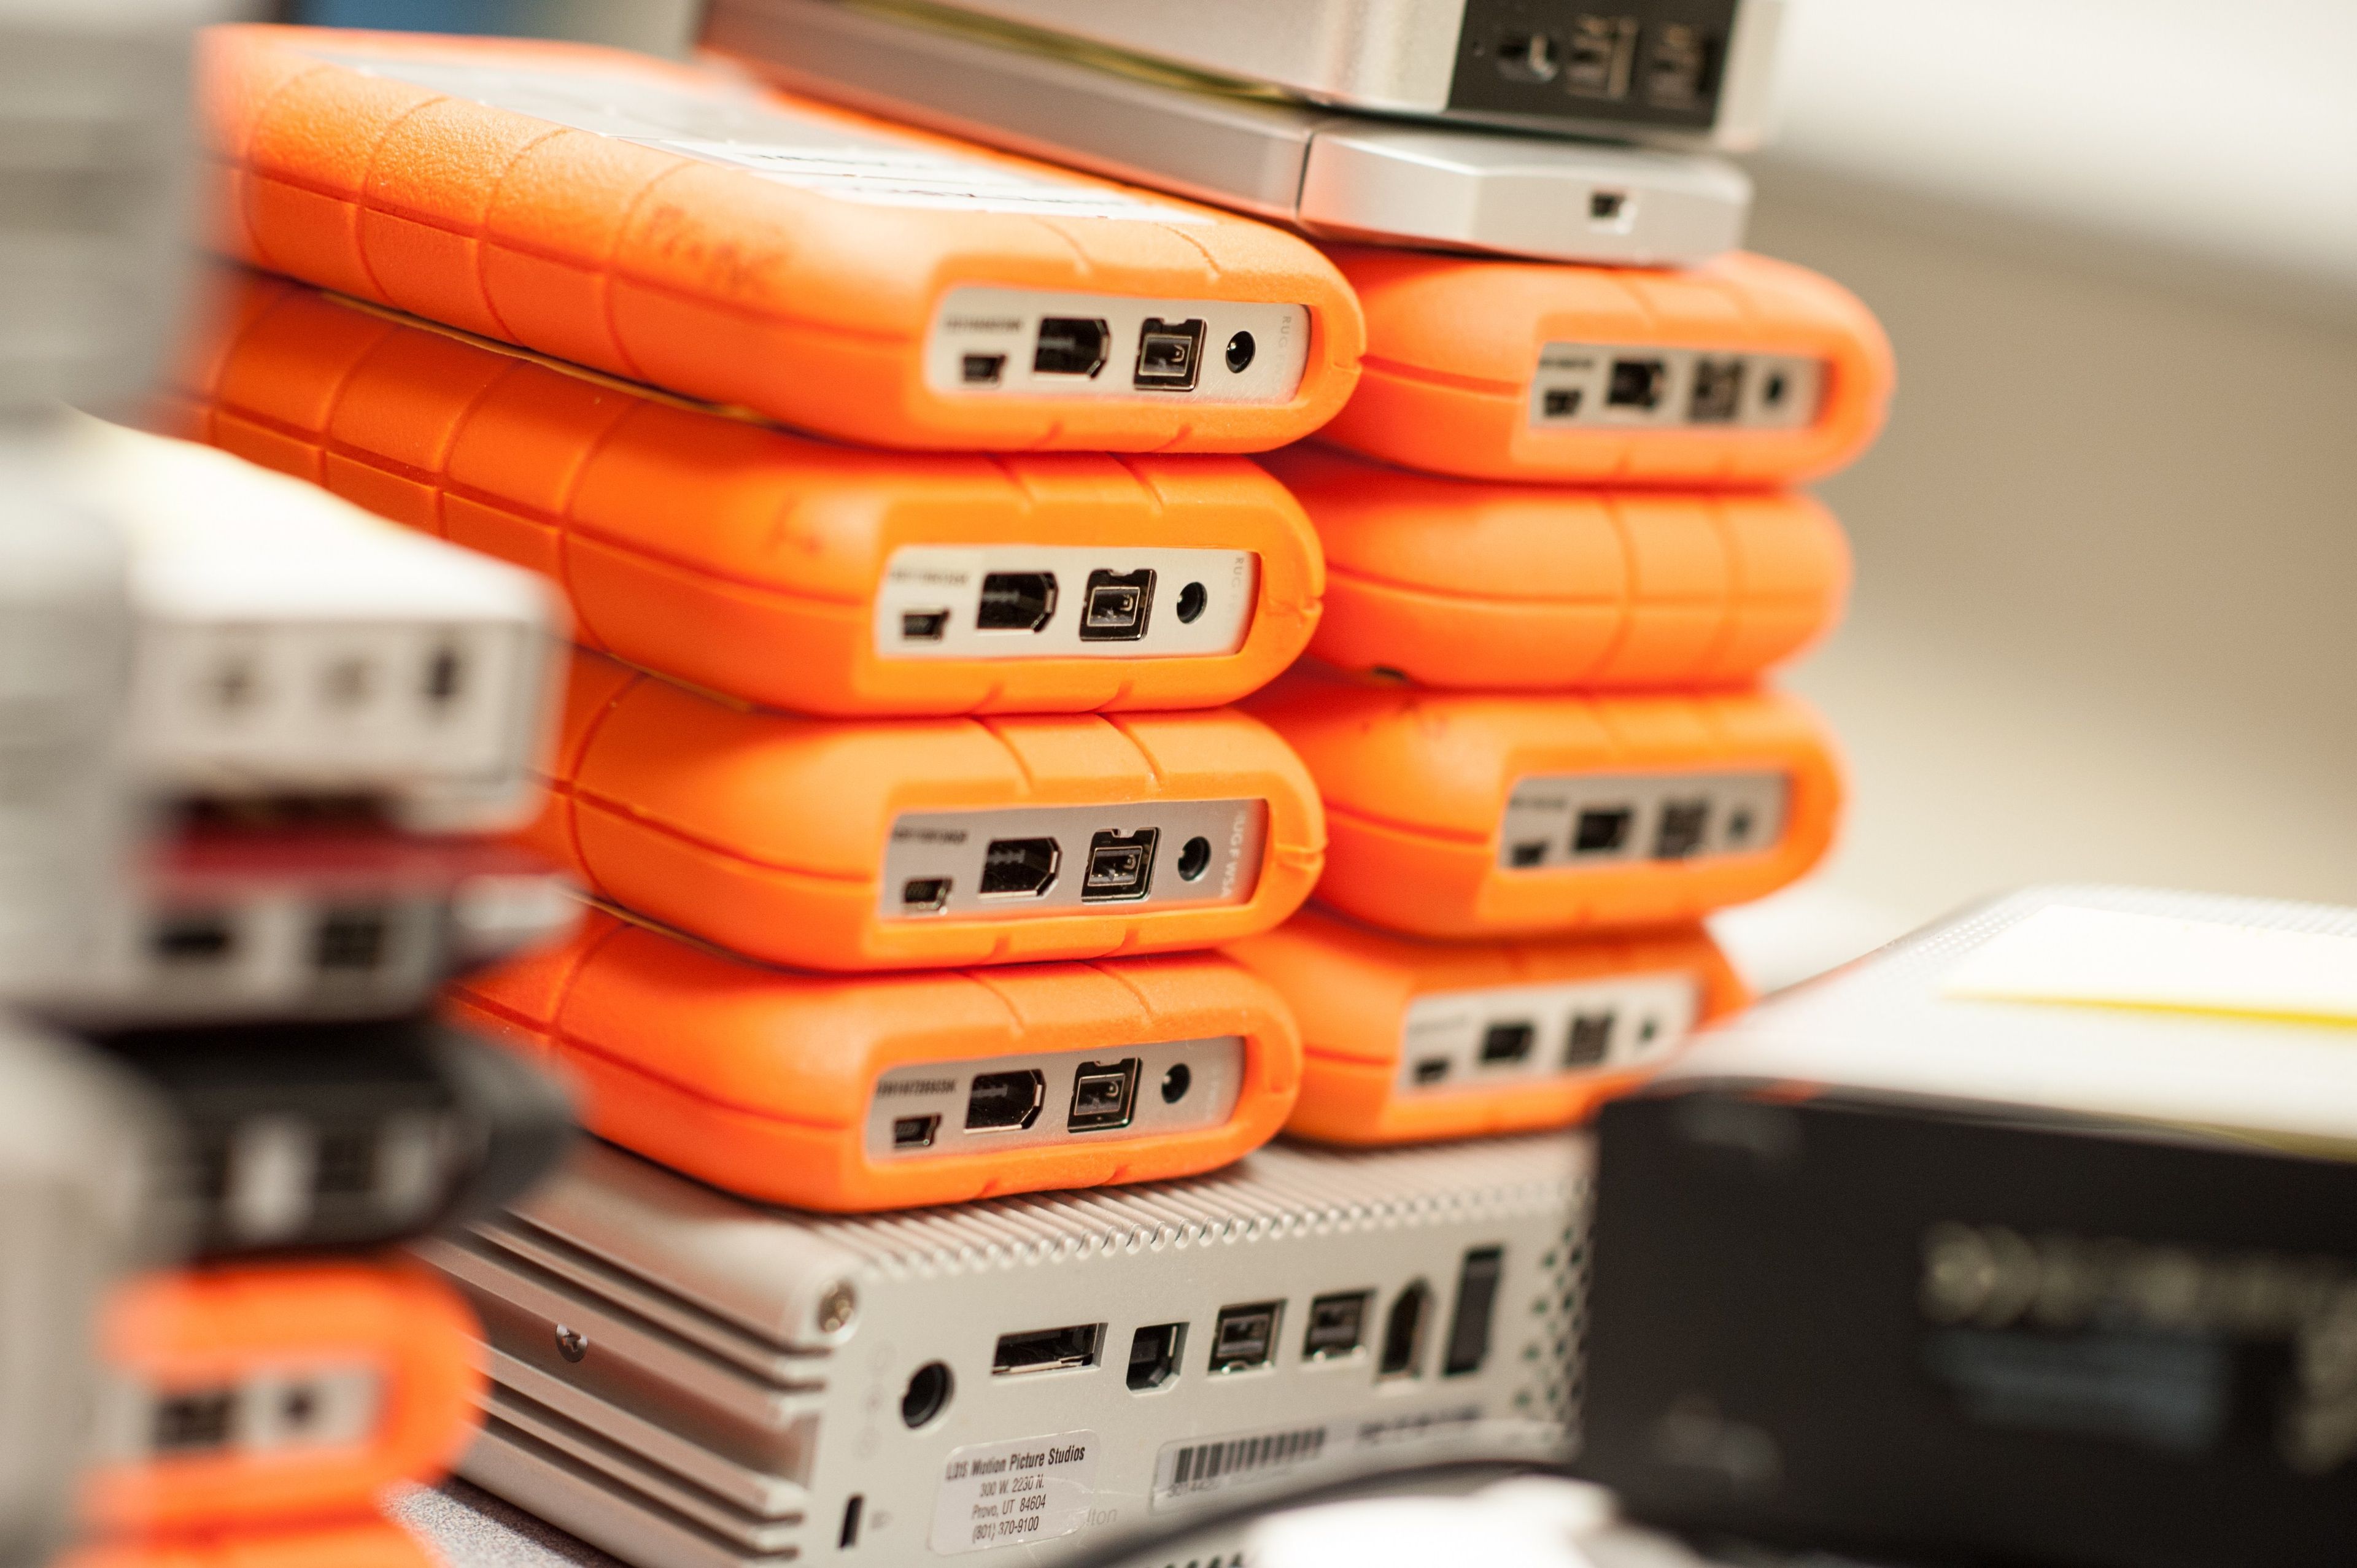 A stack of external hard drives.